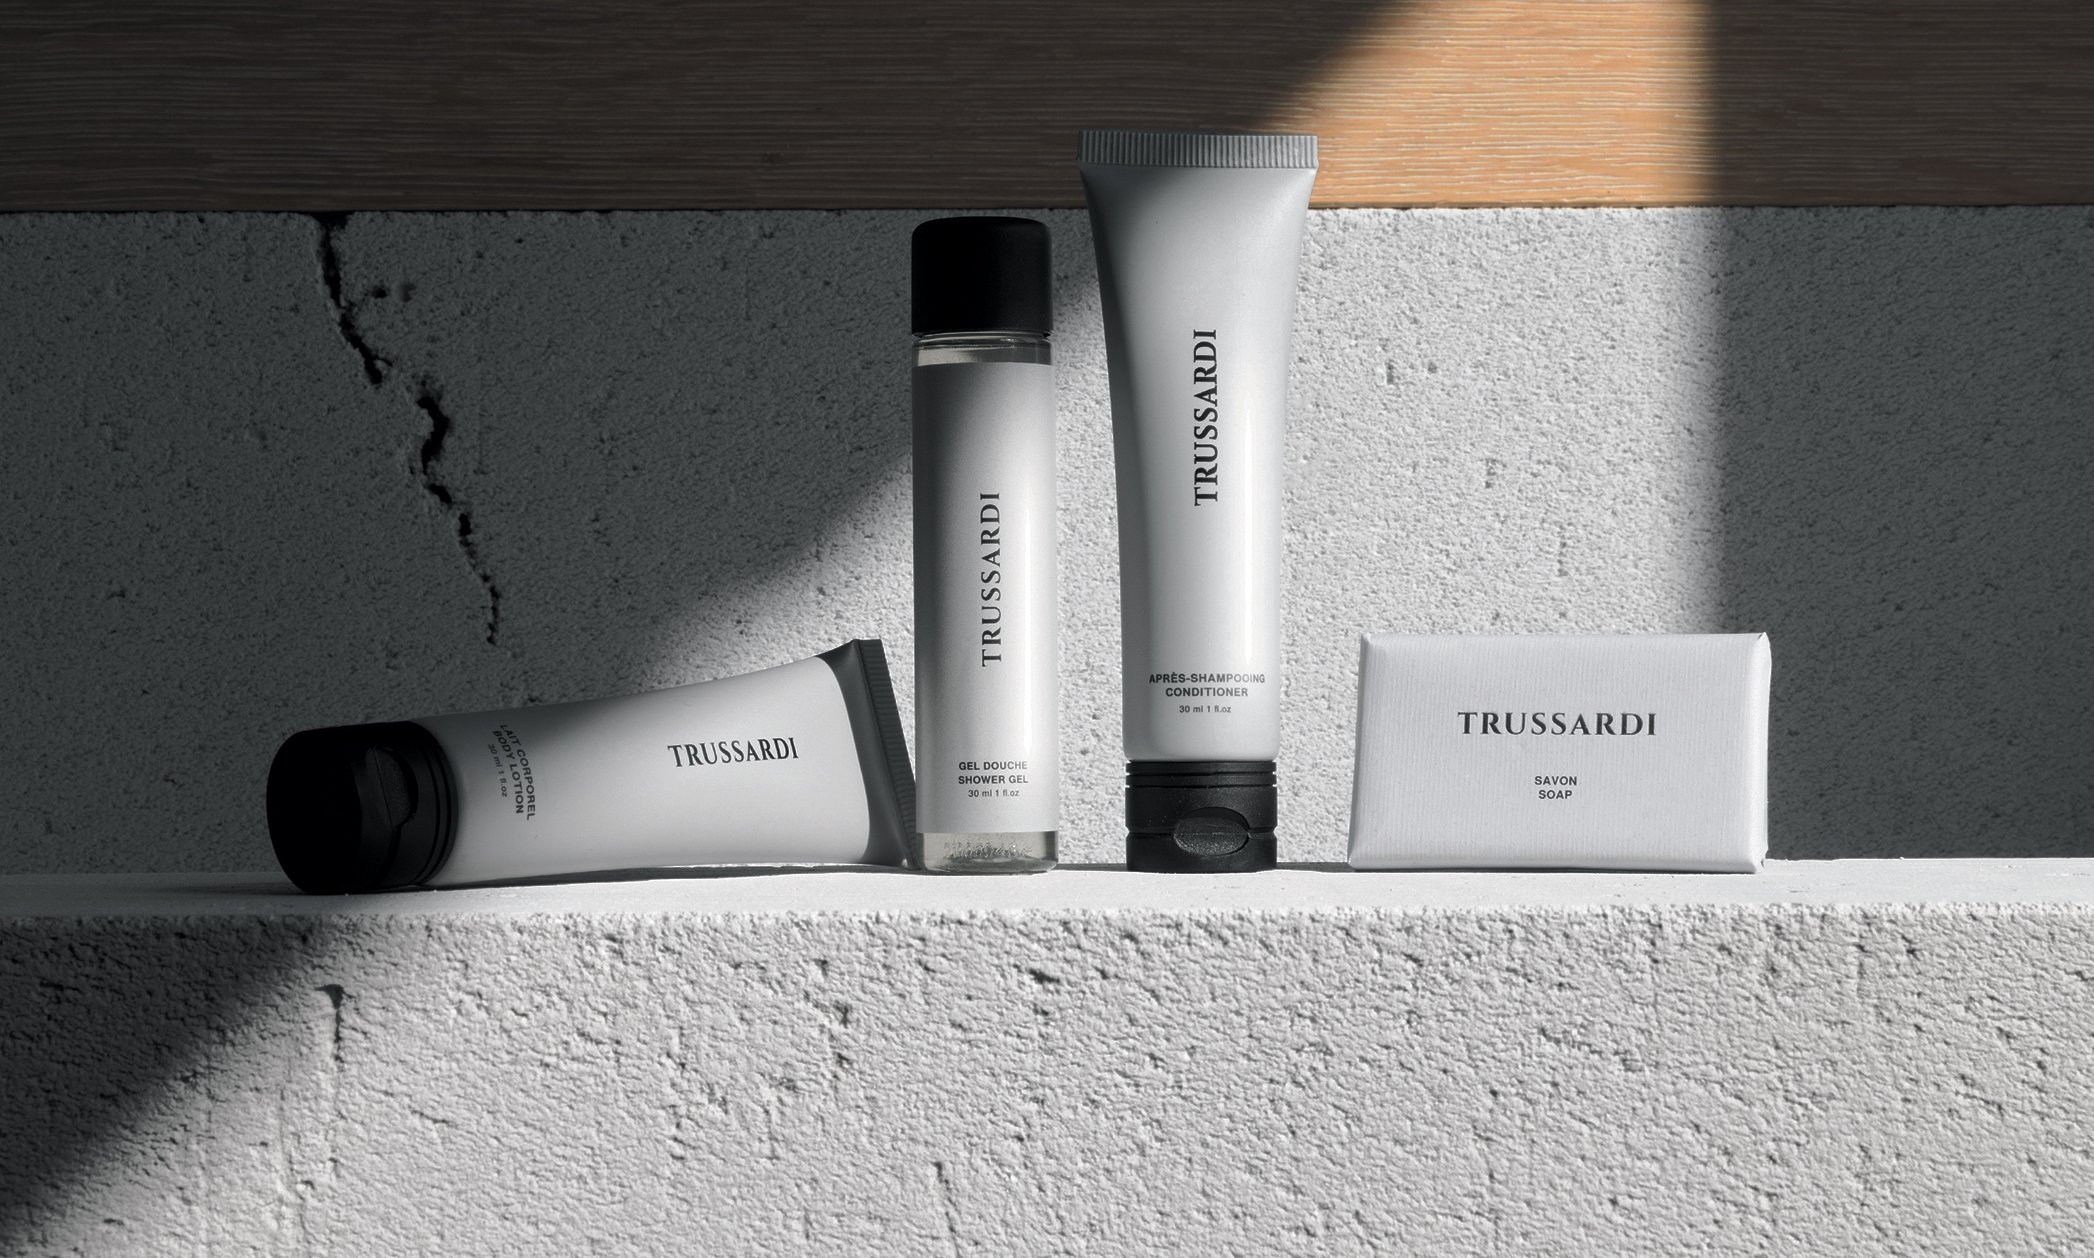 Groupe GM Trussardi hotel amenities collection